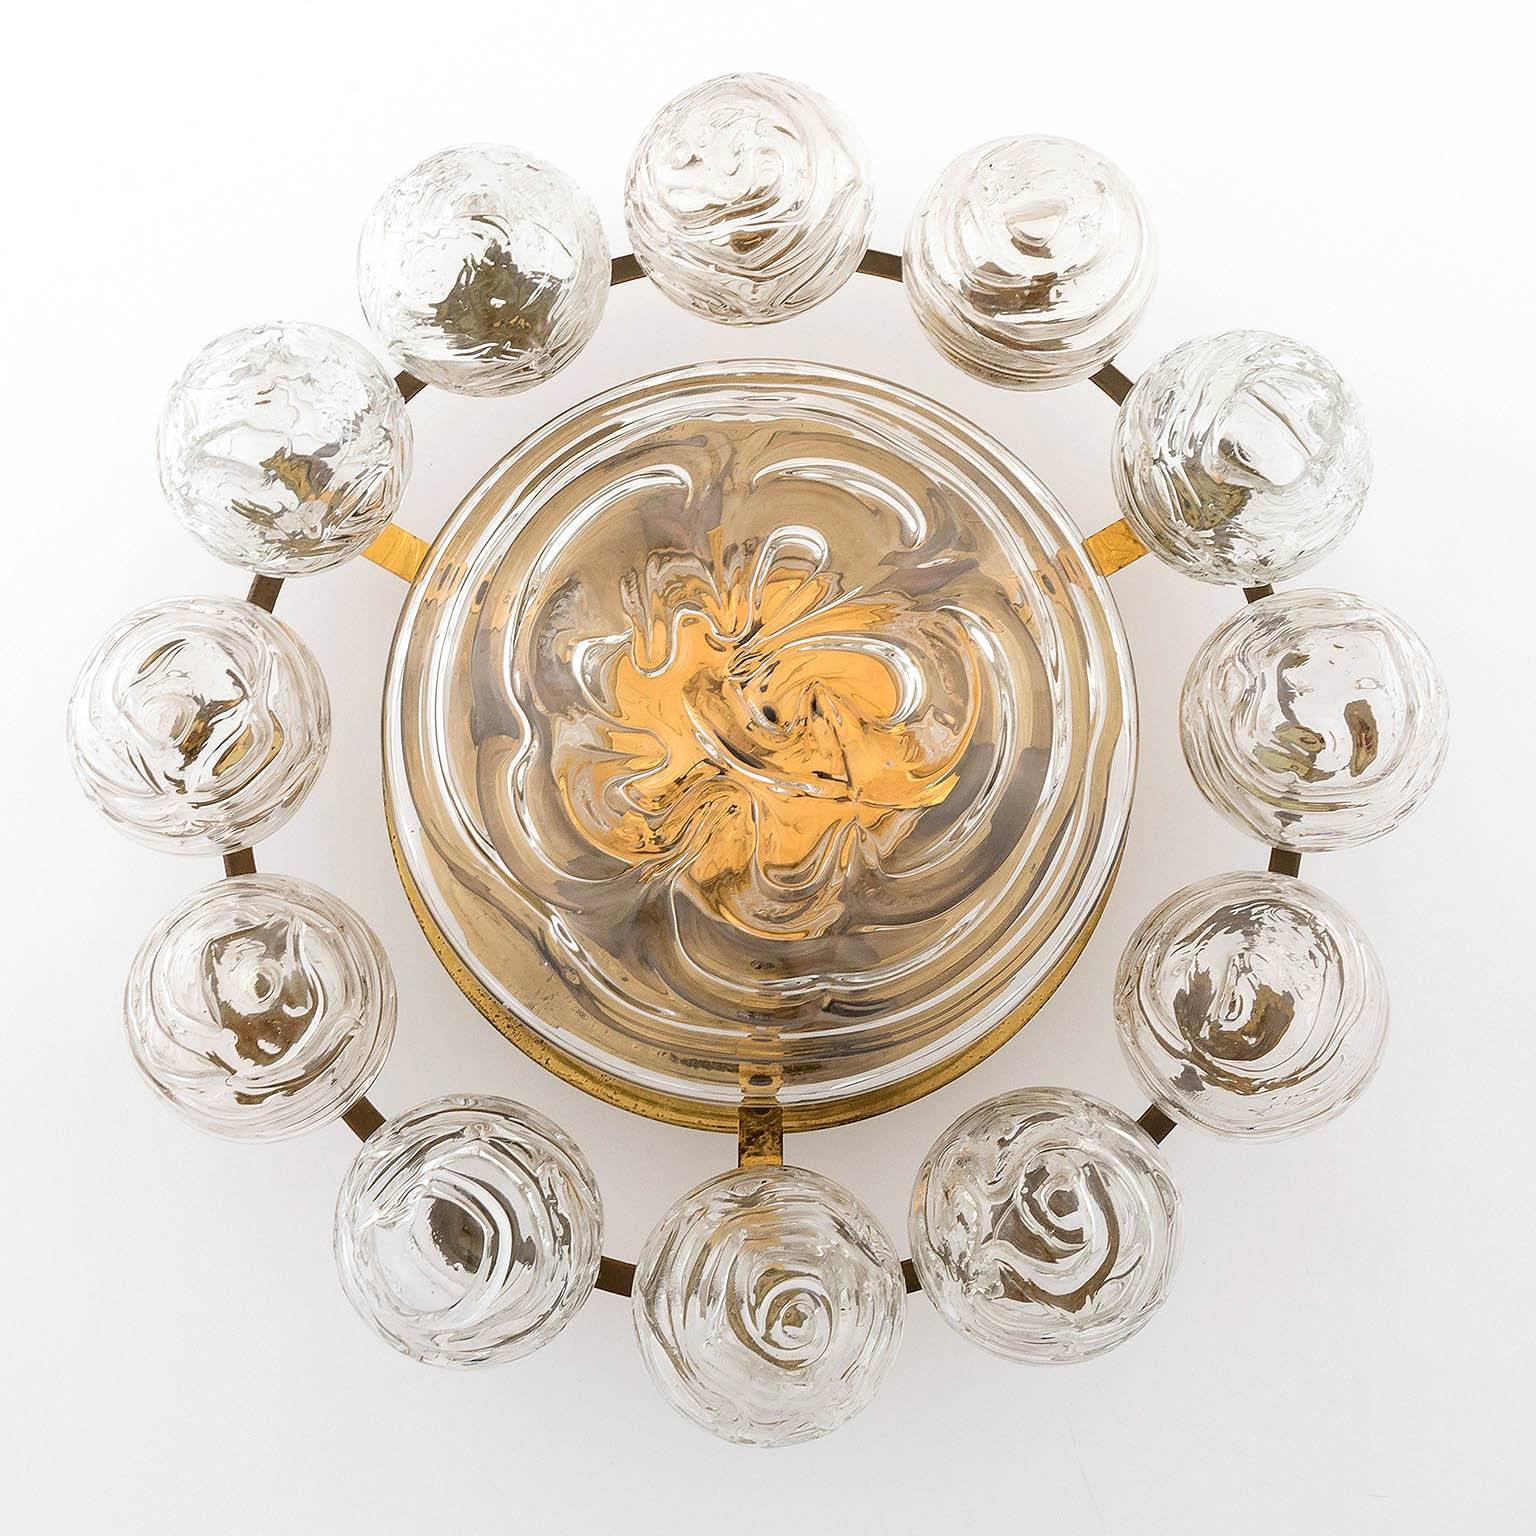 A flush mount light fixture by Doria Leuchten, Germany, manufactured in Mid-Century, circa 1960.
The lamp is made of a brass frame which holds 12 handblown glass balls and one glass disc in the centre. Each glass ball has a diameter of 3.2